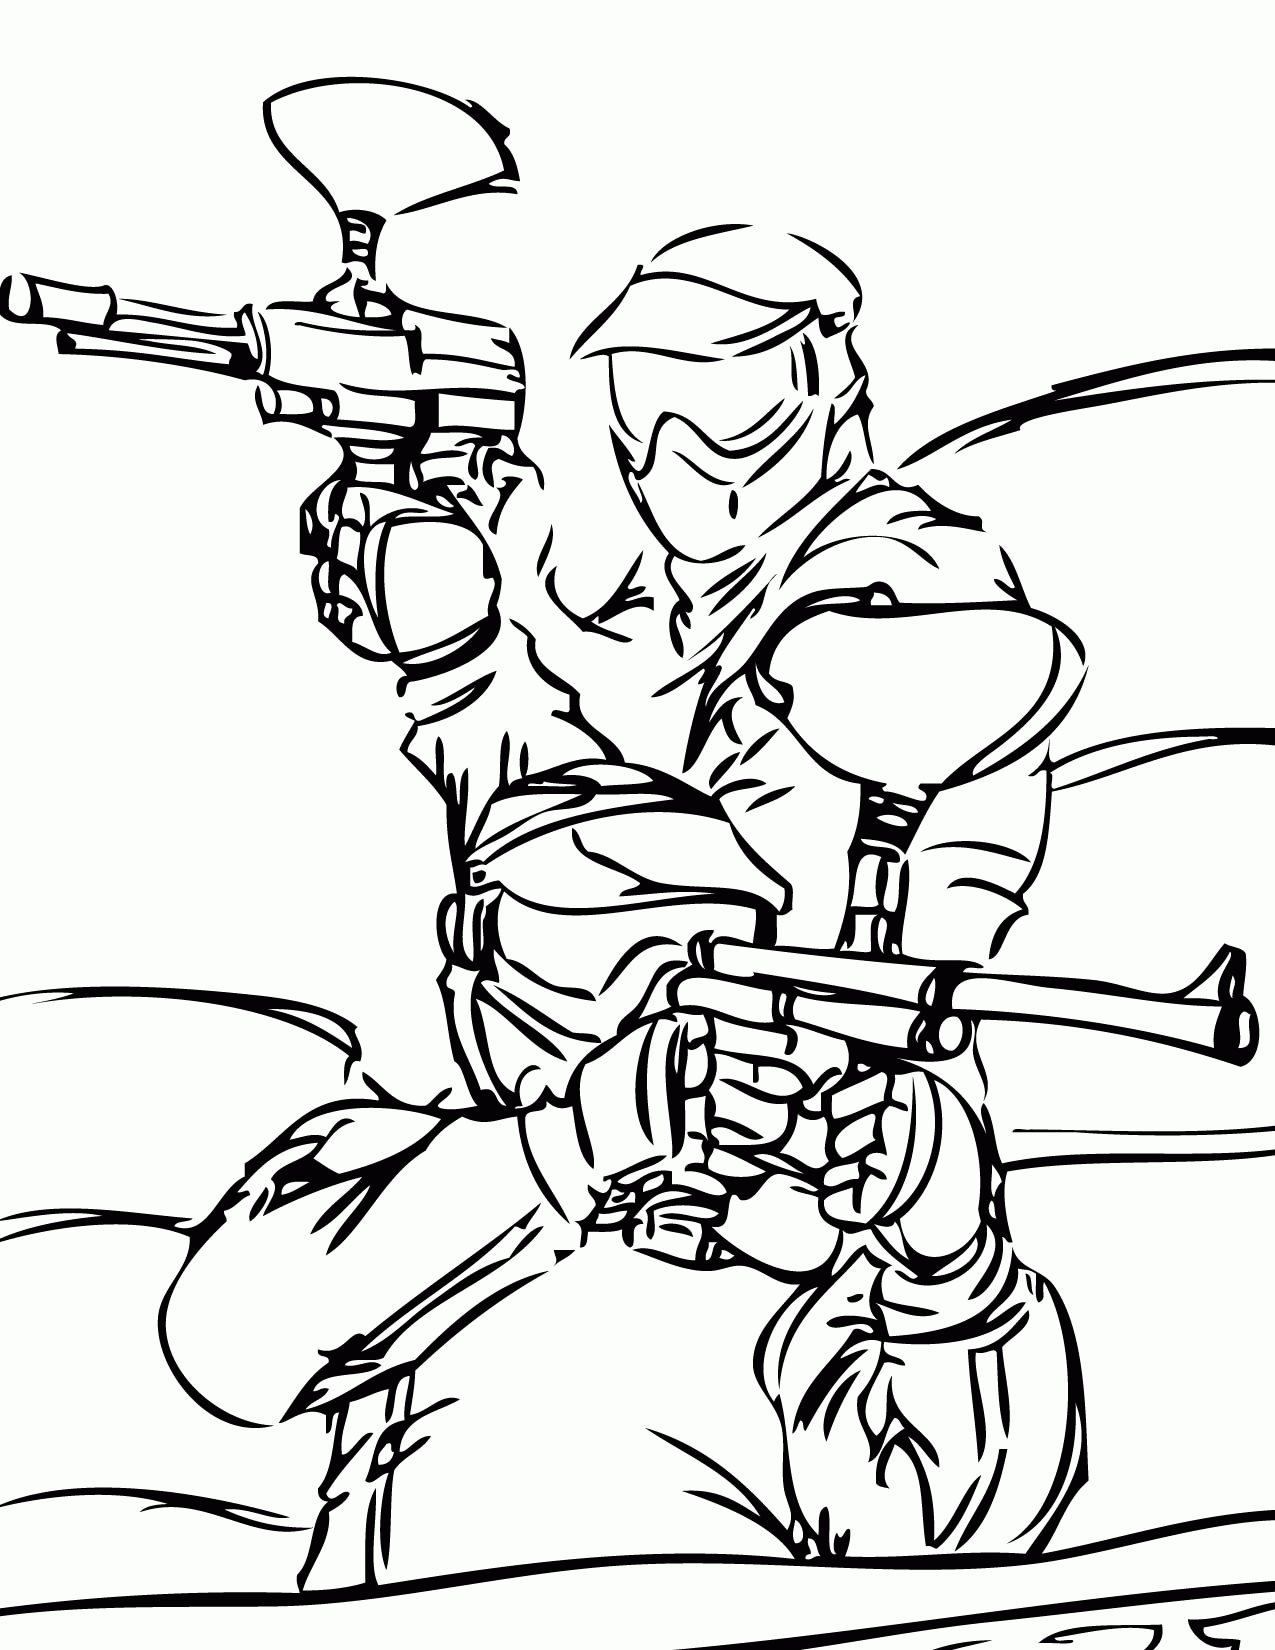 Paintball Coloring Page - Handipoints